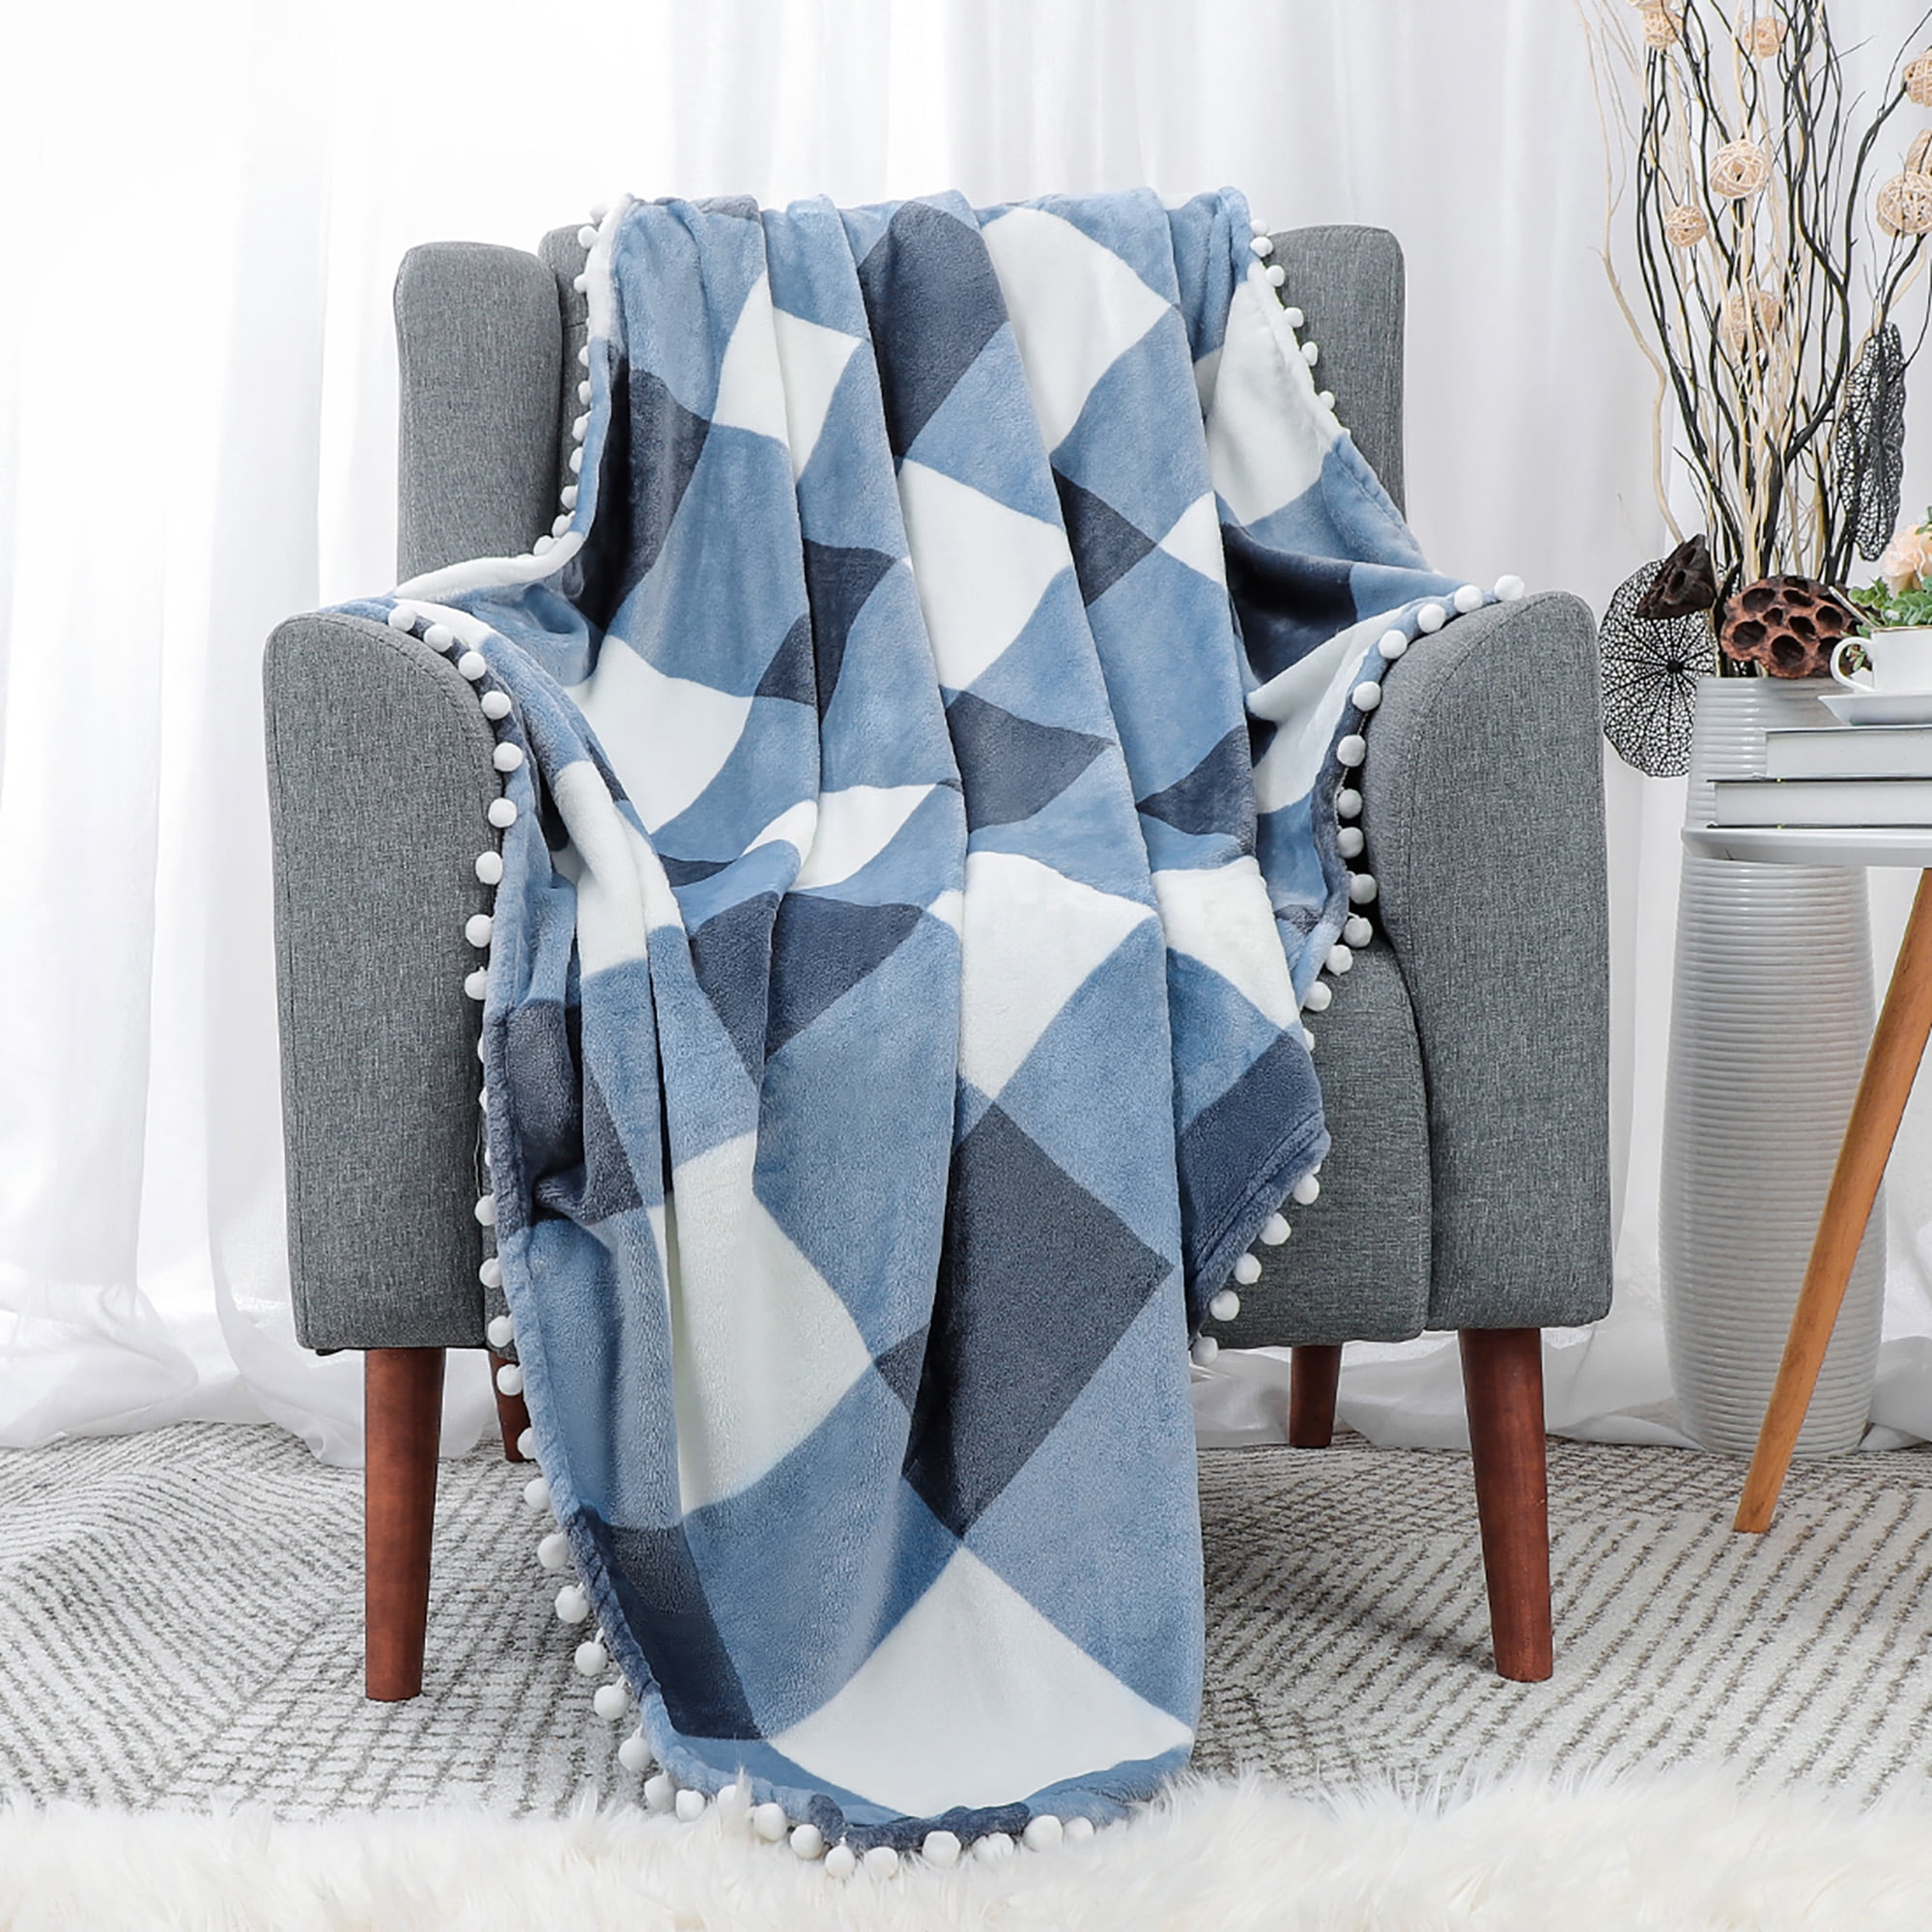 Alpha Households - ✓ *Designer Fleece Blankets* ✓Dimensions: *150cm×200cm*  ✓ Available Designs: *Louis Vuitton* *Gucci* *Dior* price: *3000 *Our Fleece  Blankets are:* *Muilti-purpose *Long lasting *Decorative *Easy care *Warm  and co